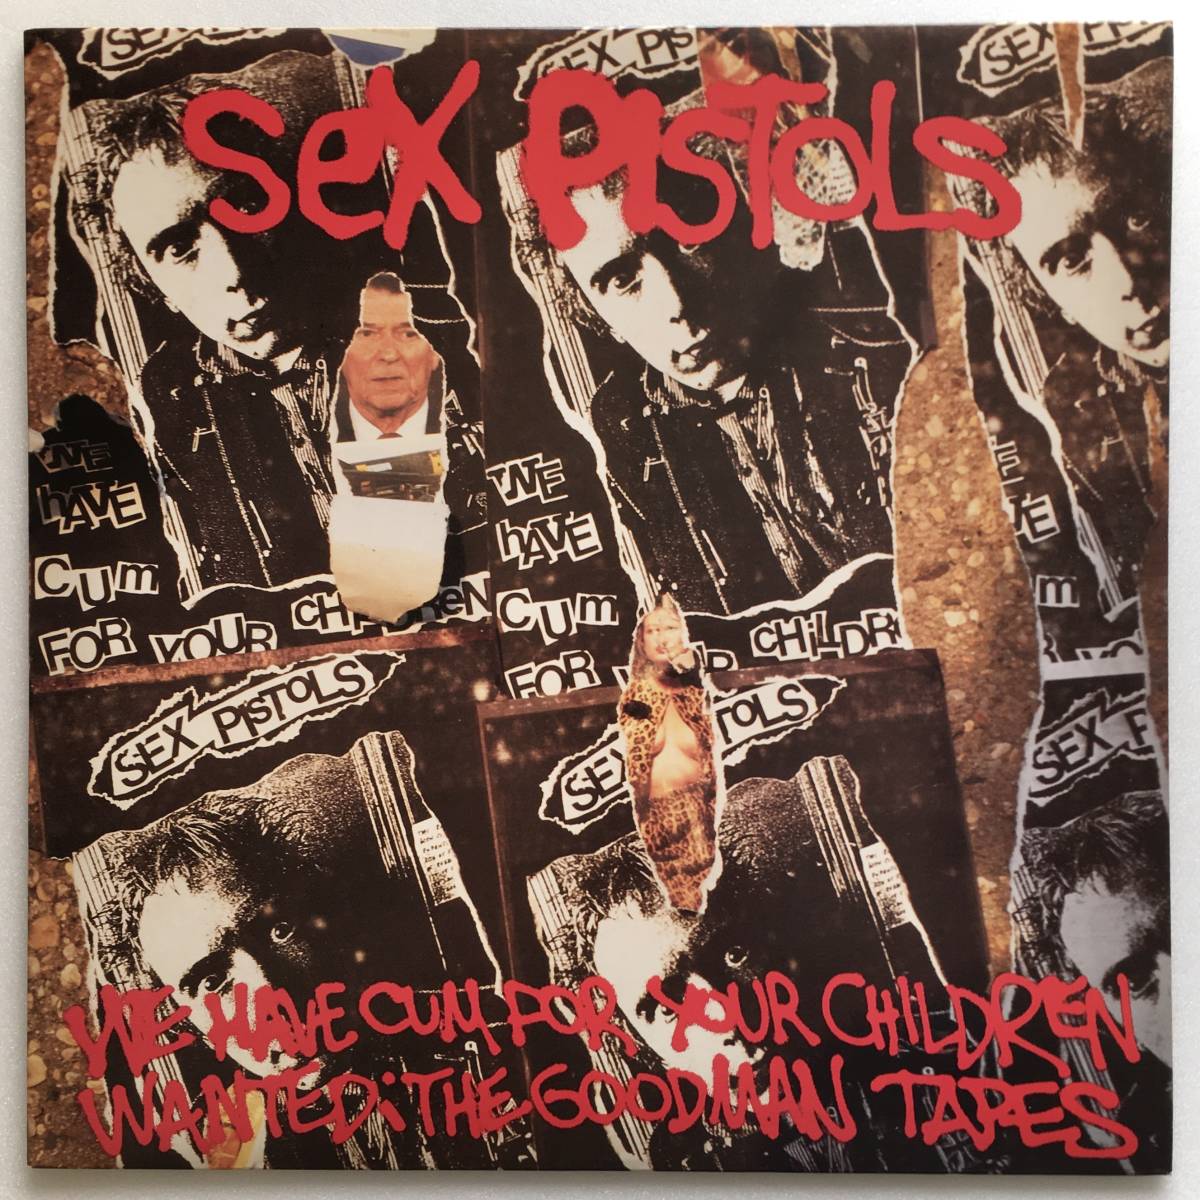 SEX PISTOLS[WE*VE CUM FOR YOUR CHILDREN(WANTED:THE GOODMAN TAPES)]US ORIGINAL SKYCLAD(sick)SEX 6 \'88